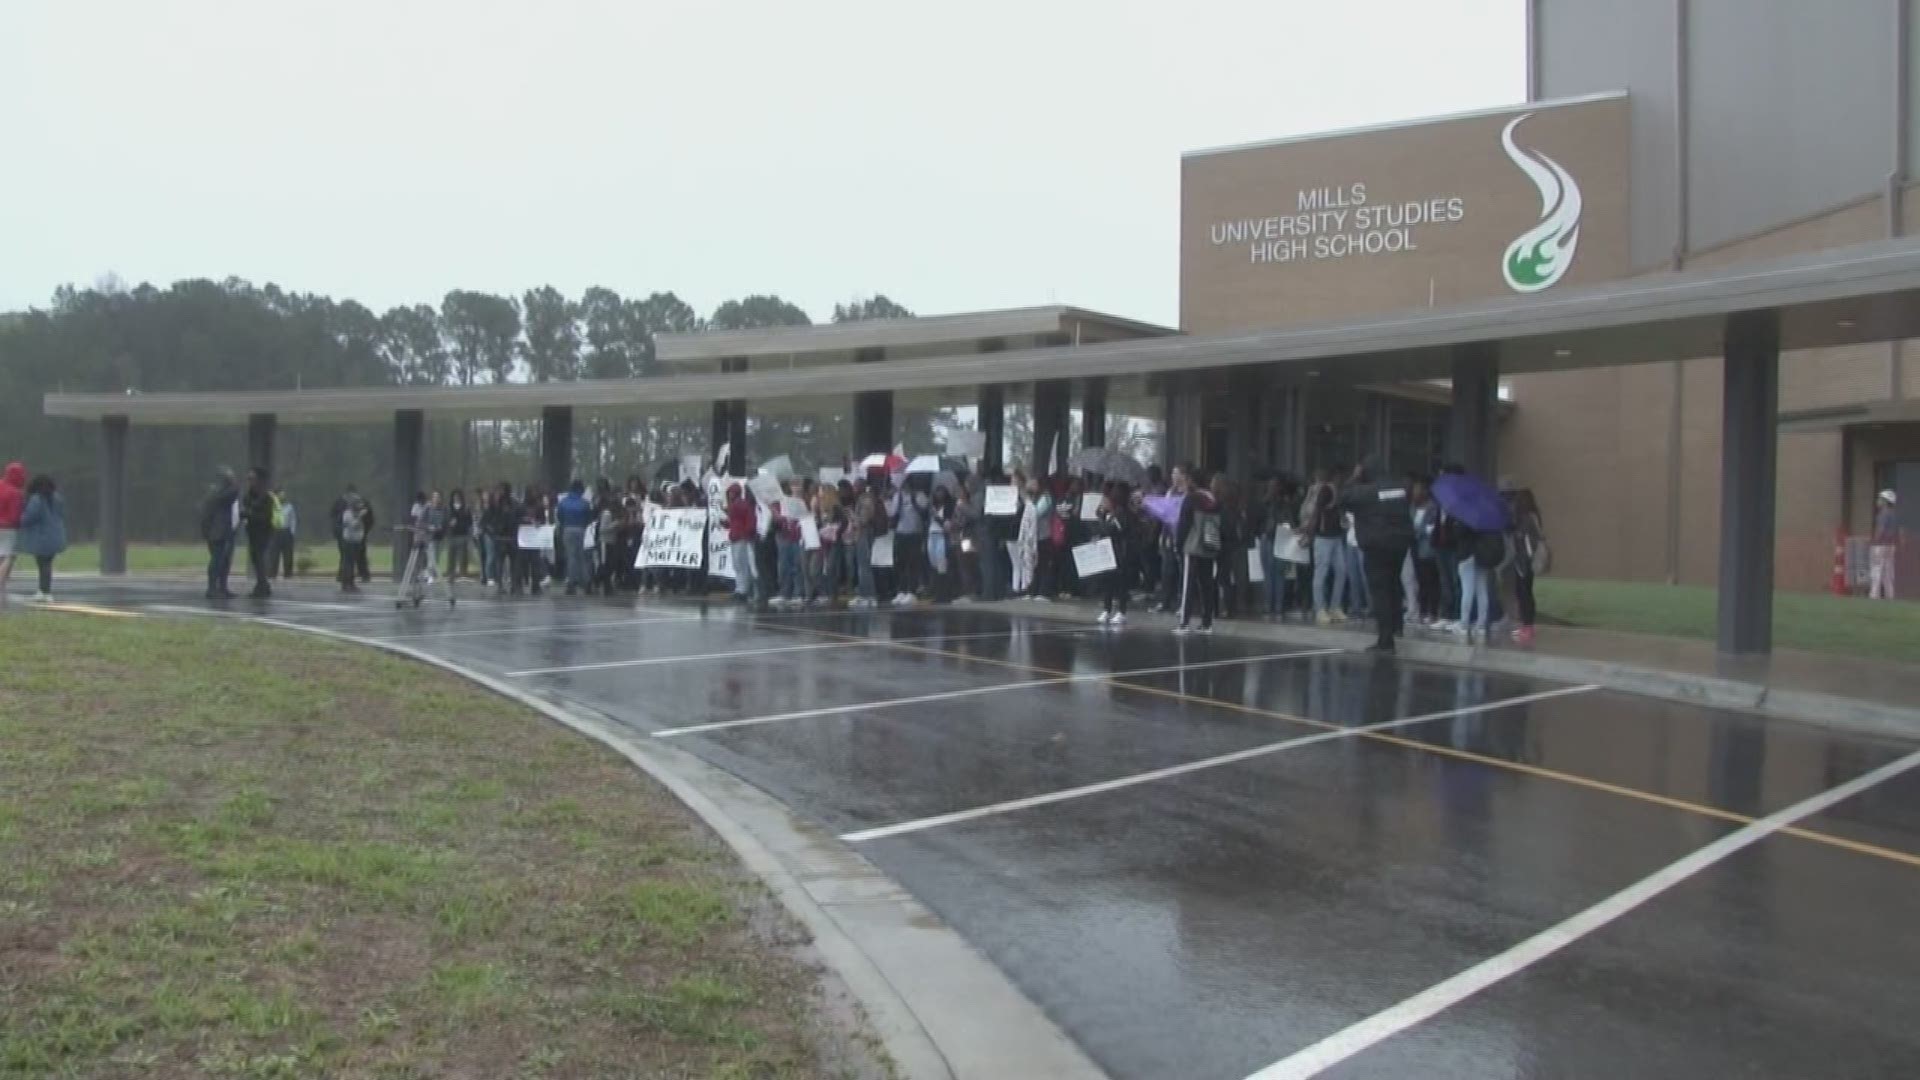 Frustration over facilities at Mills High School in Pulaski County - bubbling up into a student protest today.